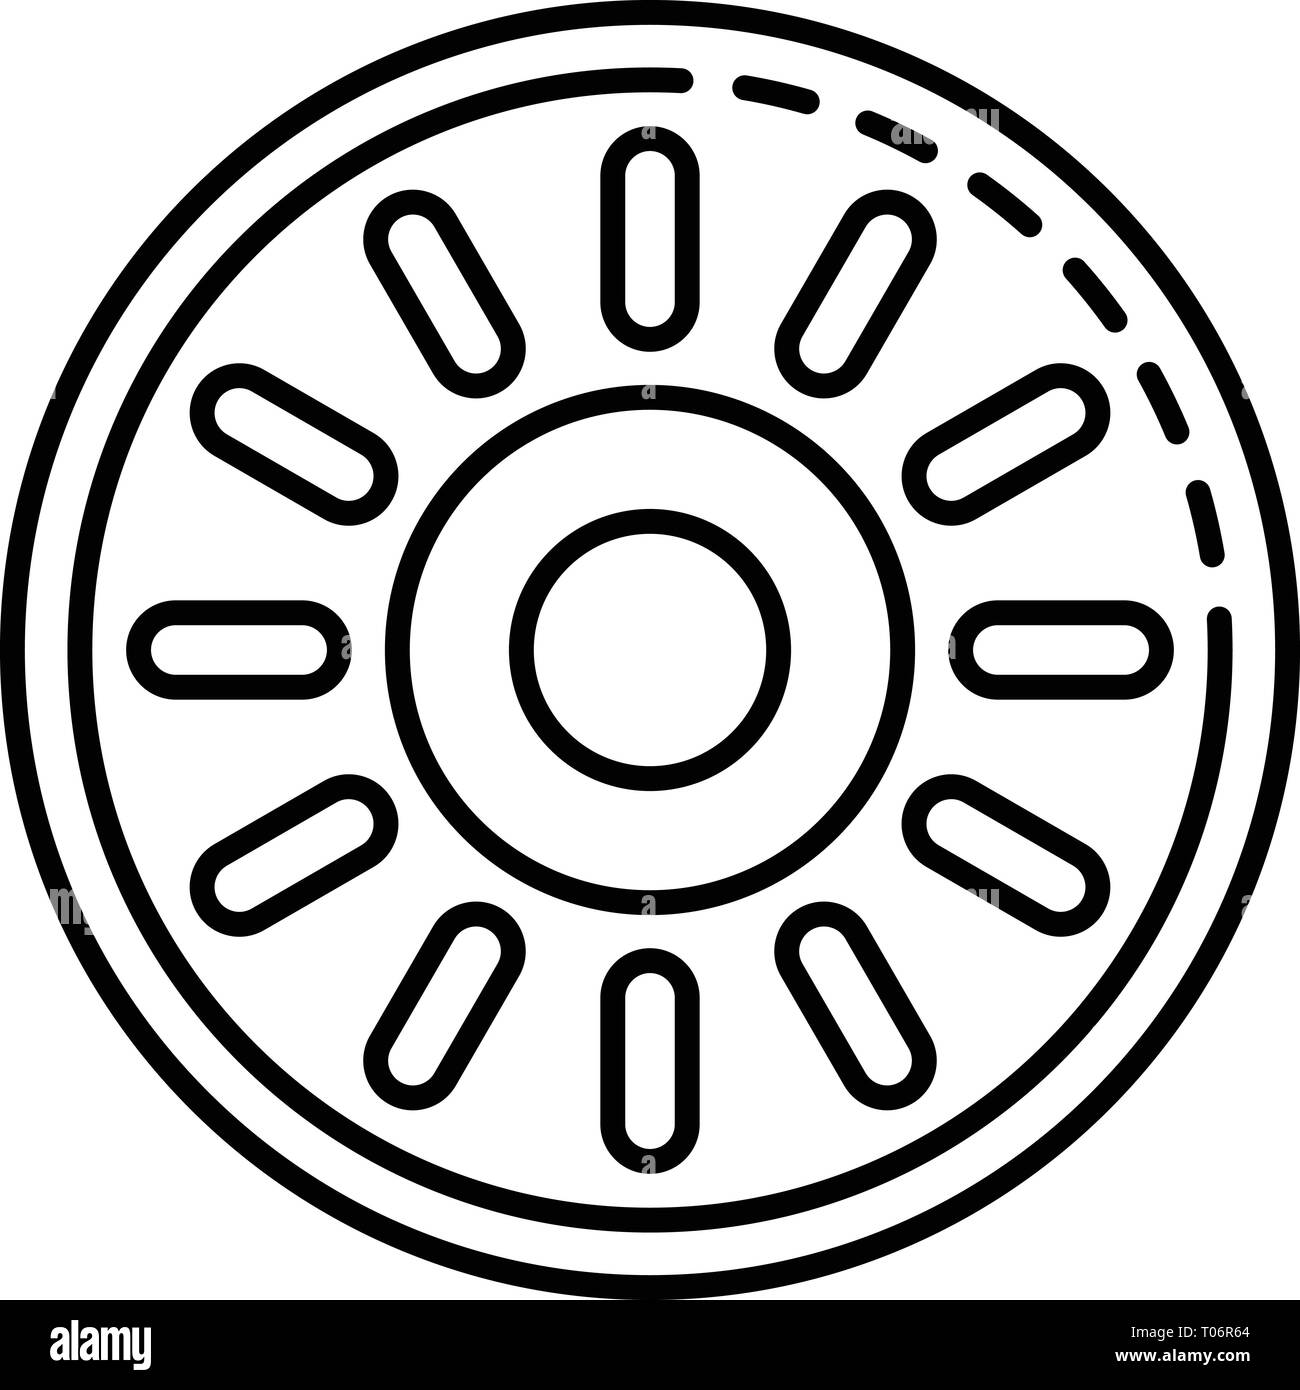 Pool hose wheel icon, outline style Stock Vector